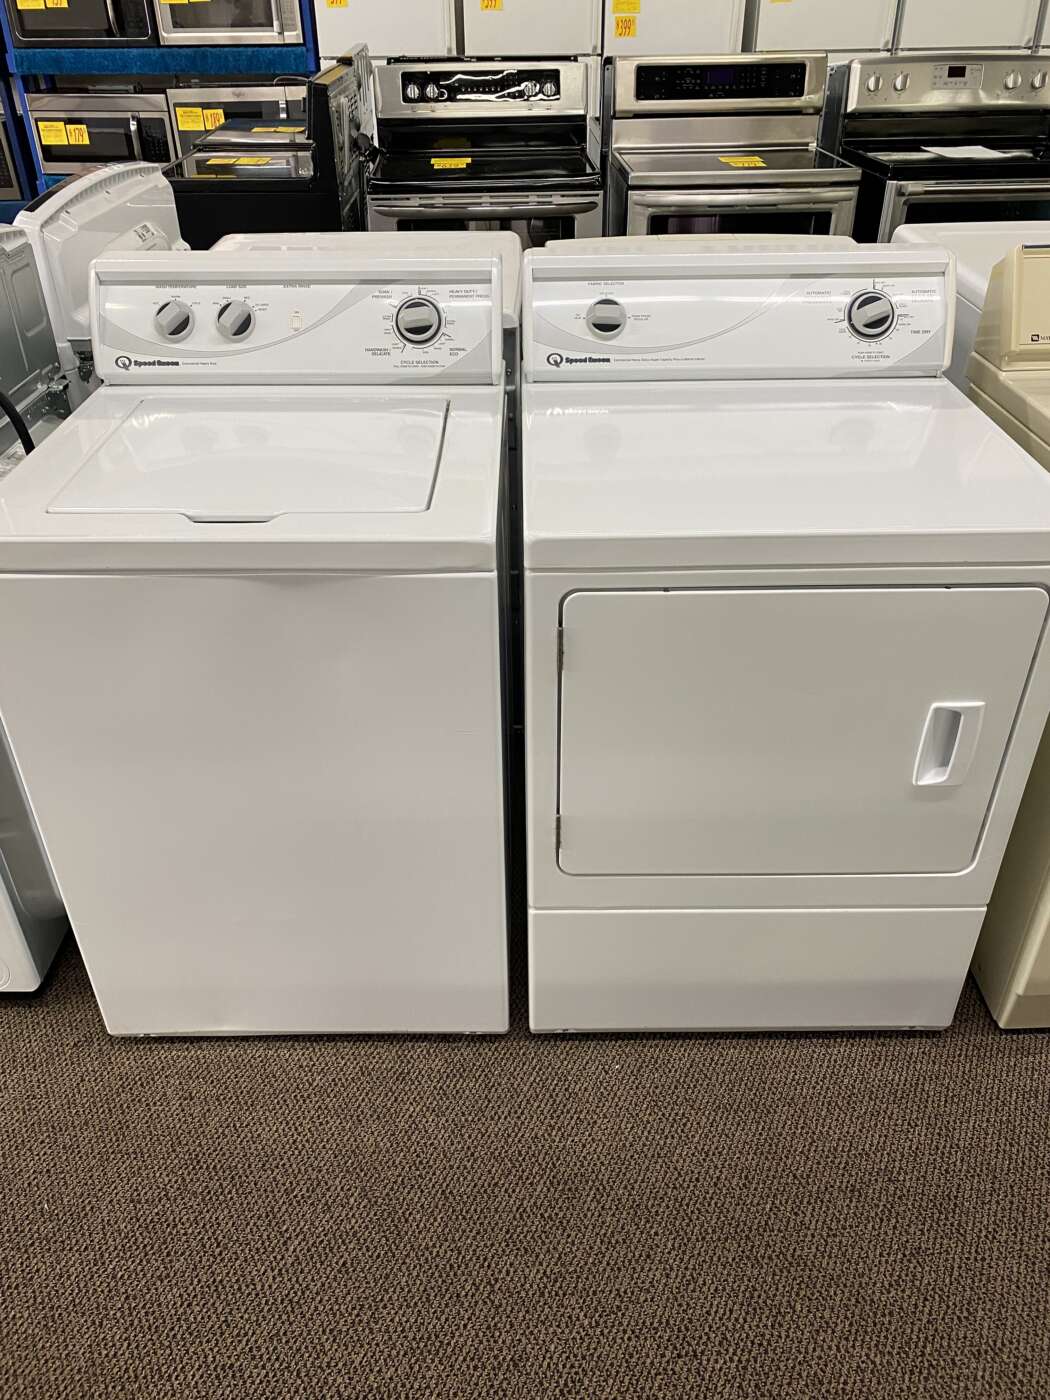 Reconditioned SPEED QUEEN 3.2 Cu. Ft. Top-Load Washer & 7.0 Cu. Ft. Electric Dryer – White